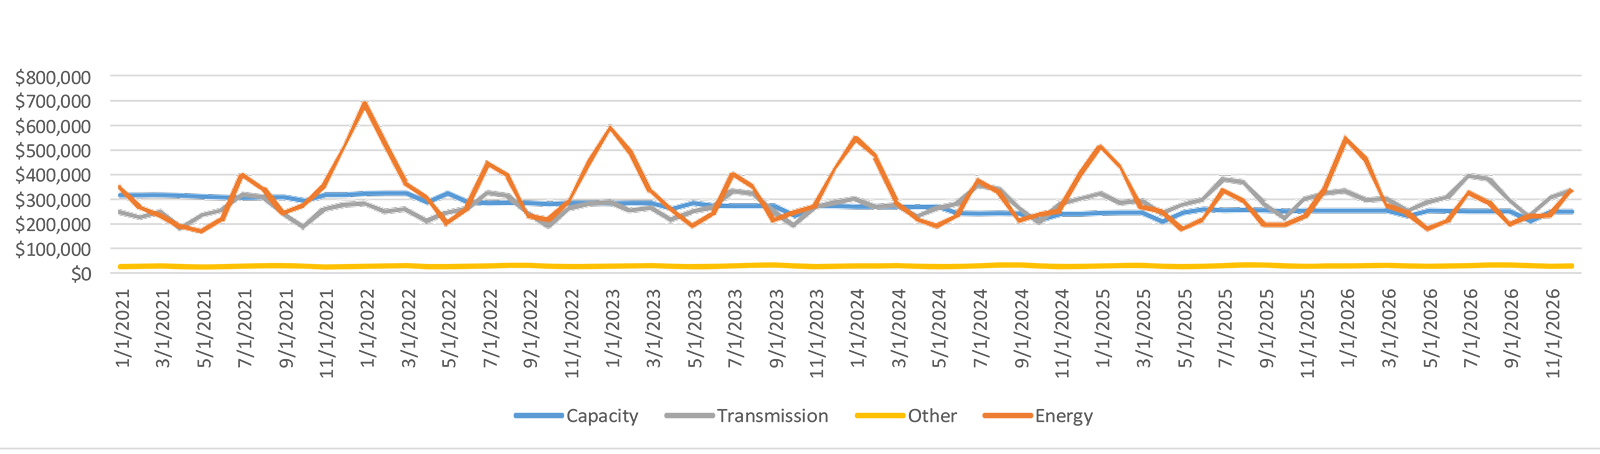 Line Chart of MMLD's 6-Year Power Forecast showing capacity, transmission, other, and energy